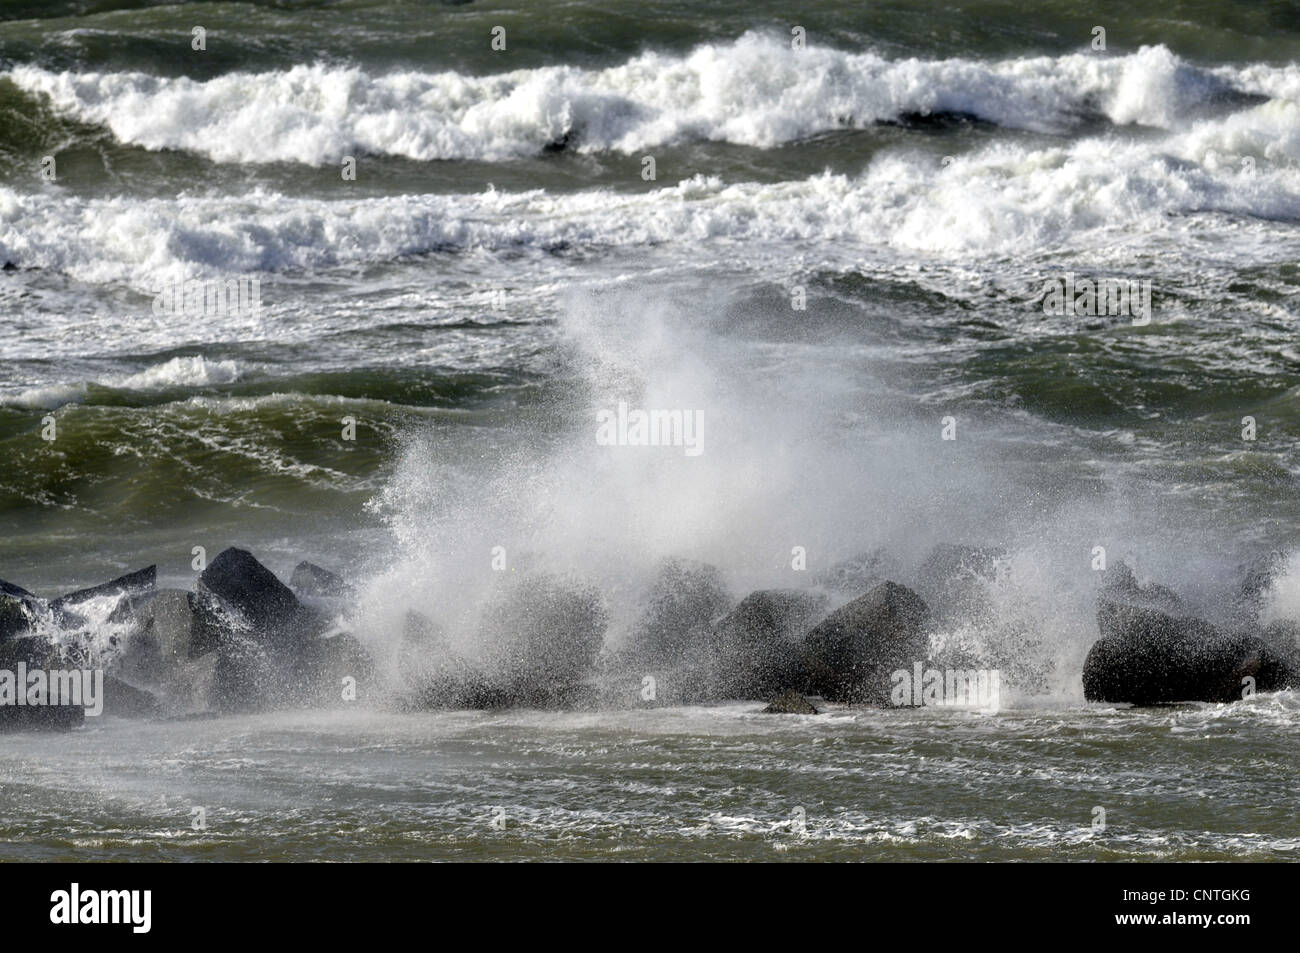 wave-breaker in the stormy Baltic Sea, Germany, Mecklenburg Vorpommern Stock Photo